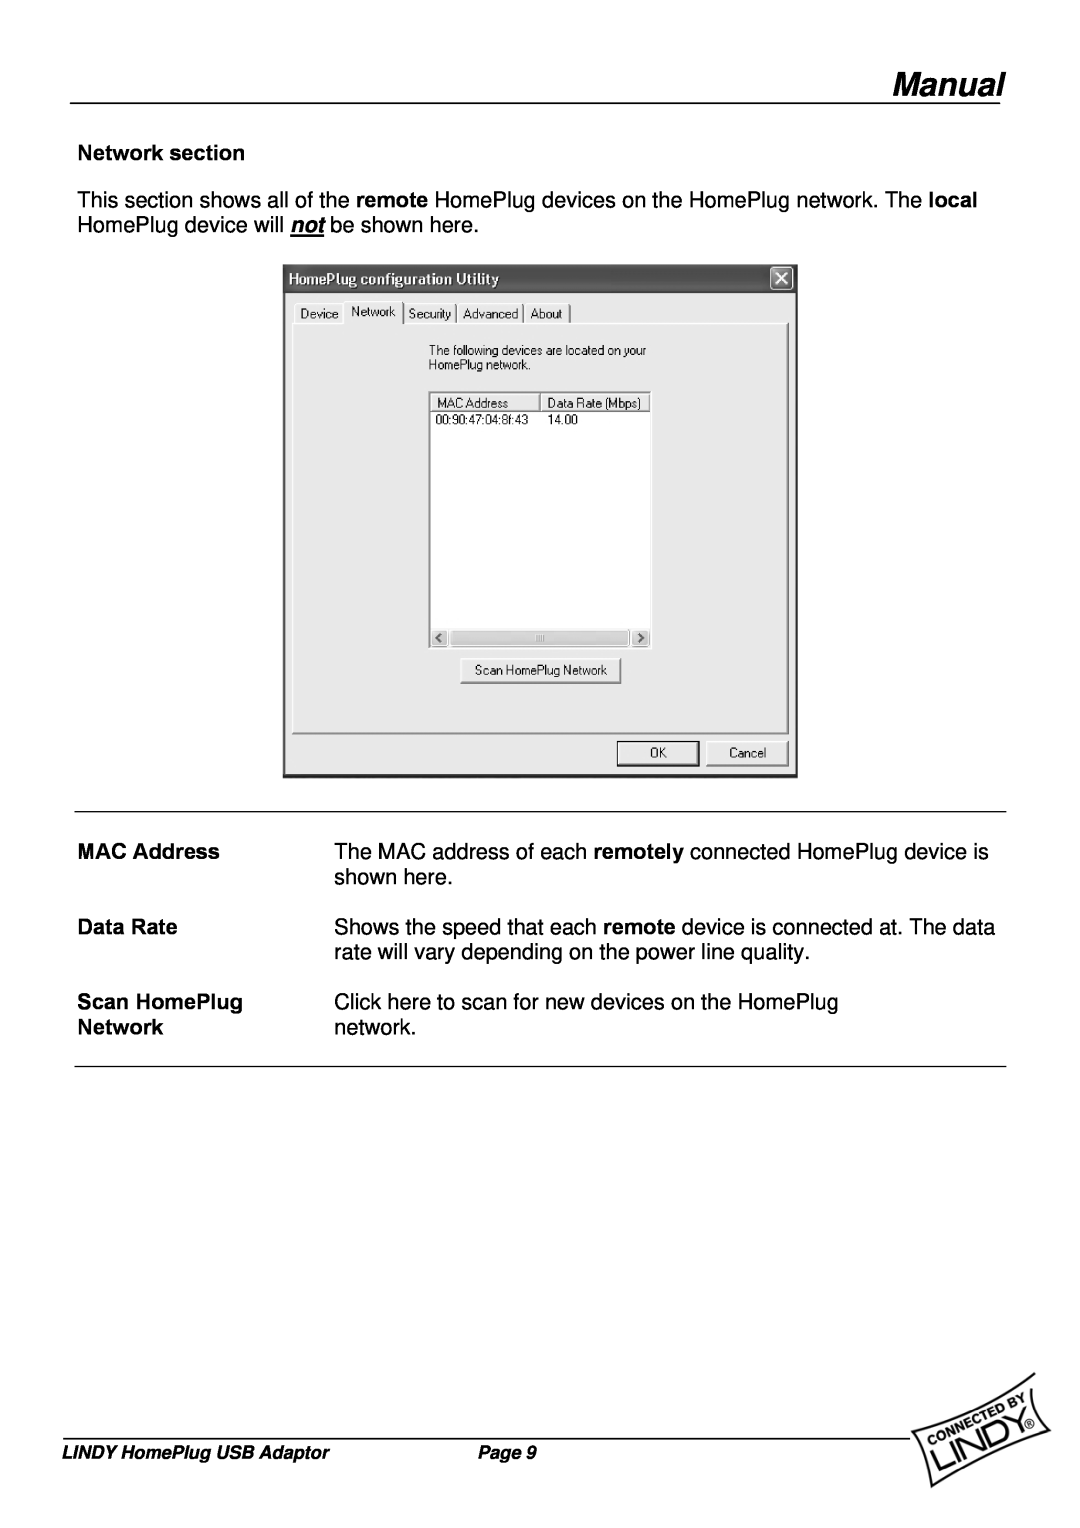 Lindy 25121 user manual Manual, Network section, MAC Address, Data Rate, Scan HomePlug 